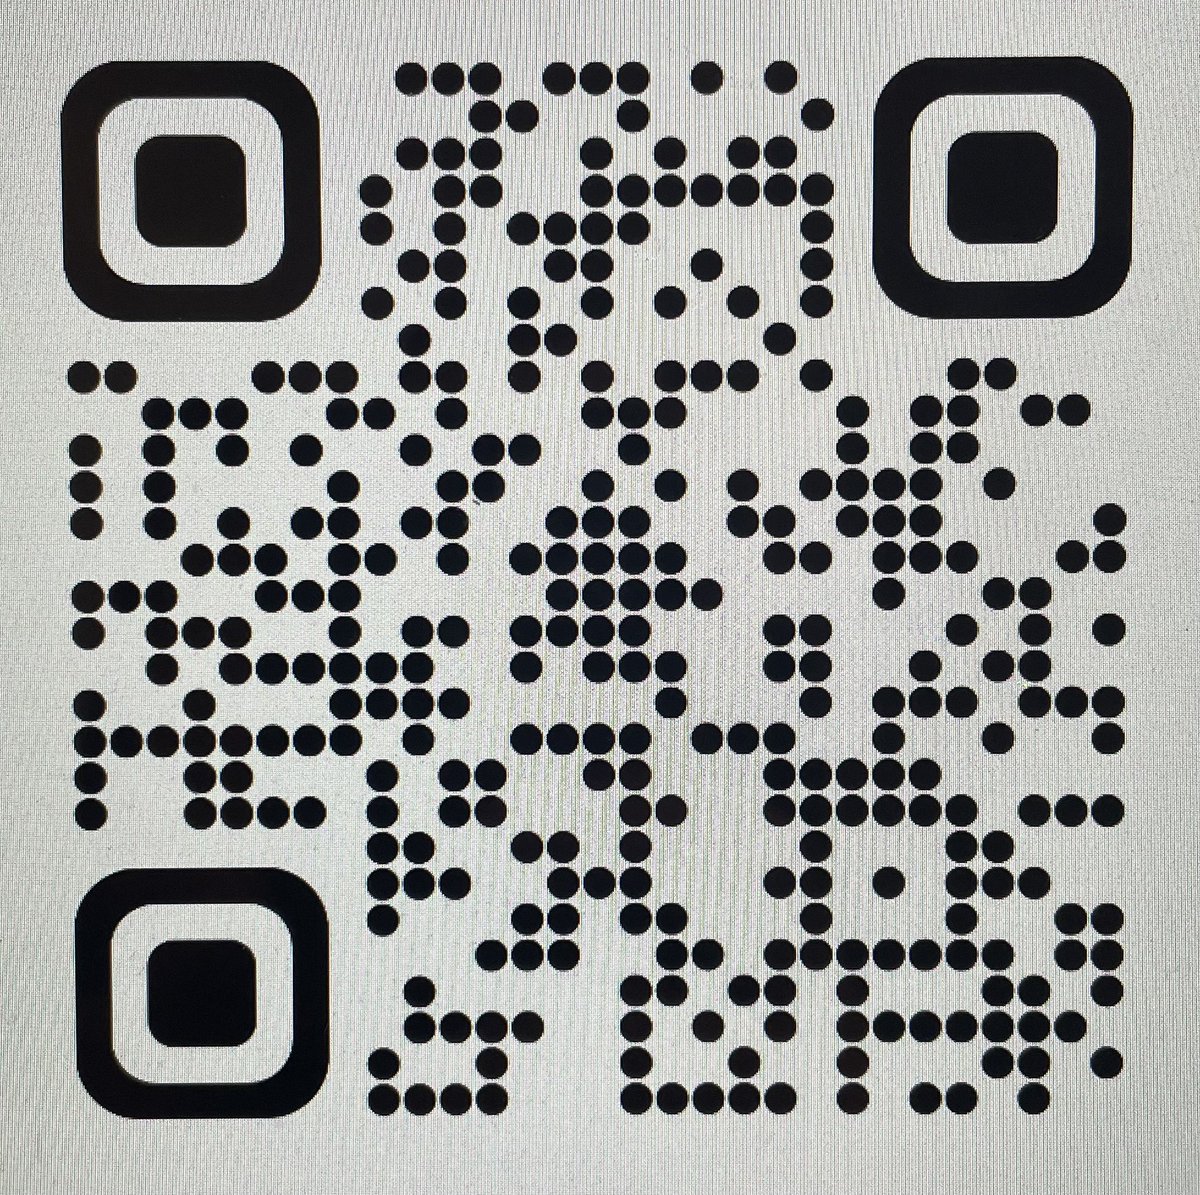 Junk for Jerseys pick up and drop off is coming fast (4/27!) Sign up for the pick up with the QR code below.